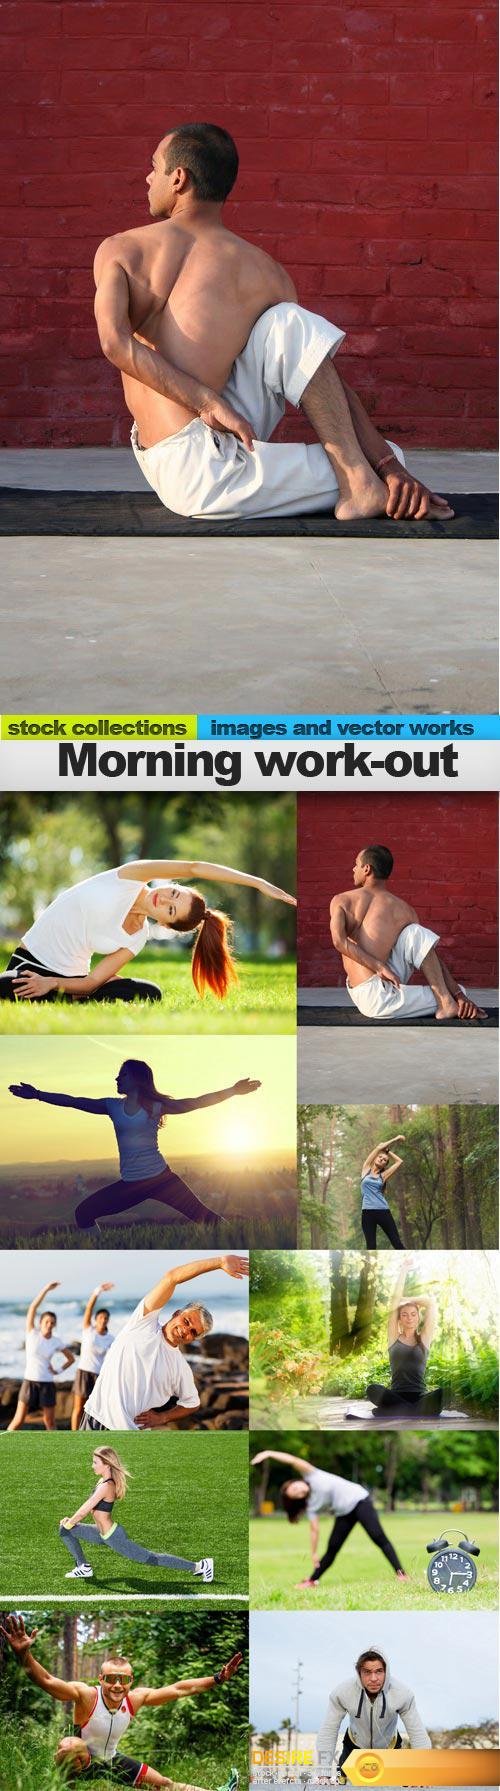 Morning work-out, 10 x UHQ JPEG